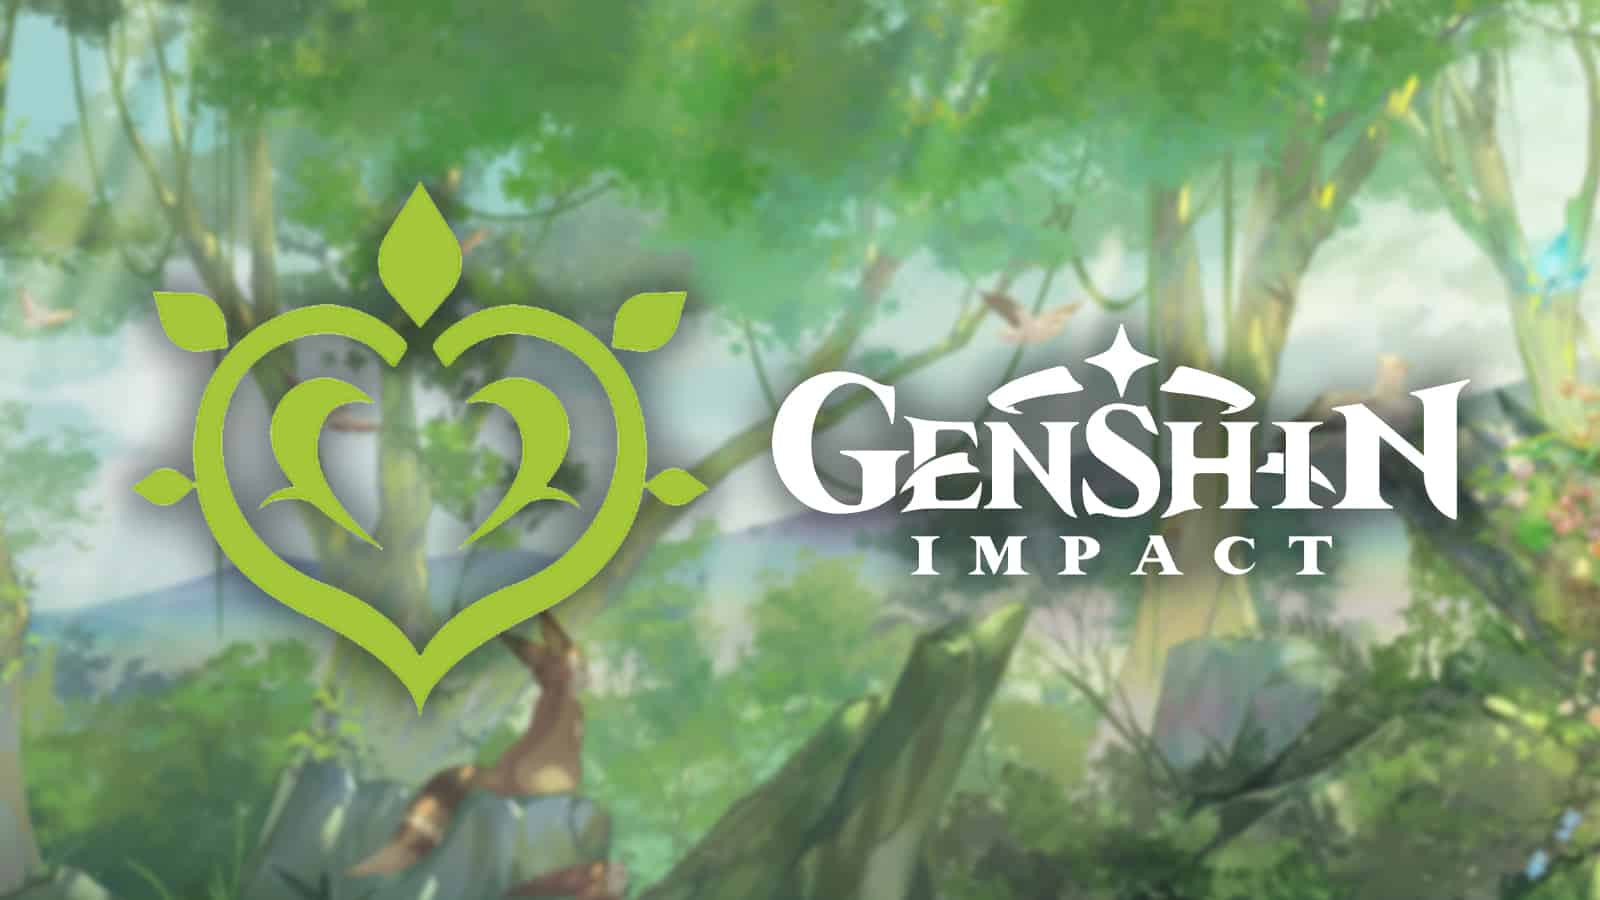 Dendro logo in Genshin Impact imposed on forest